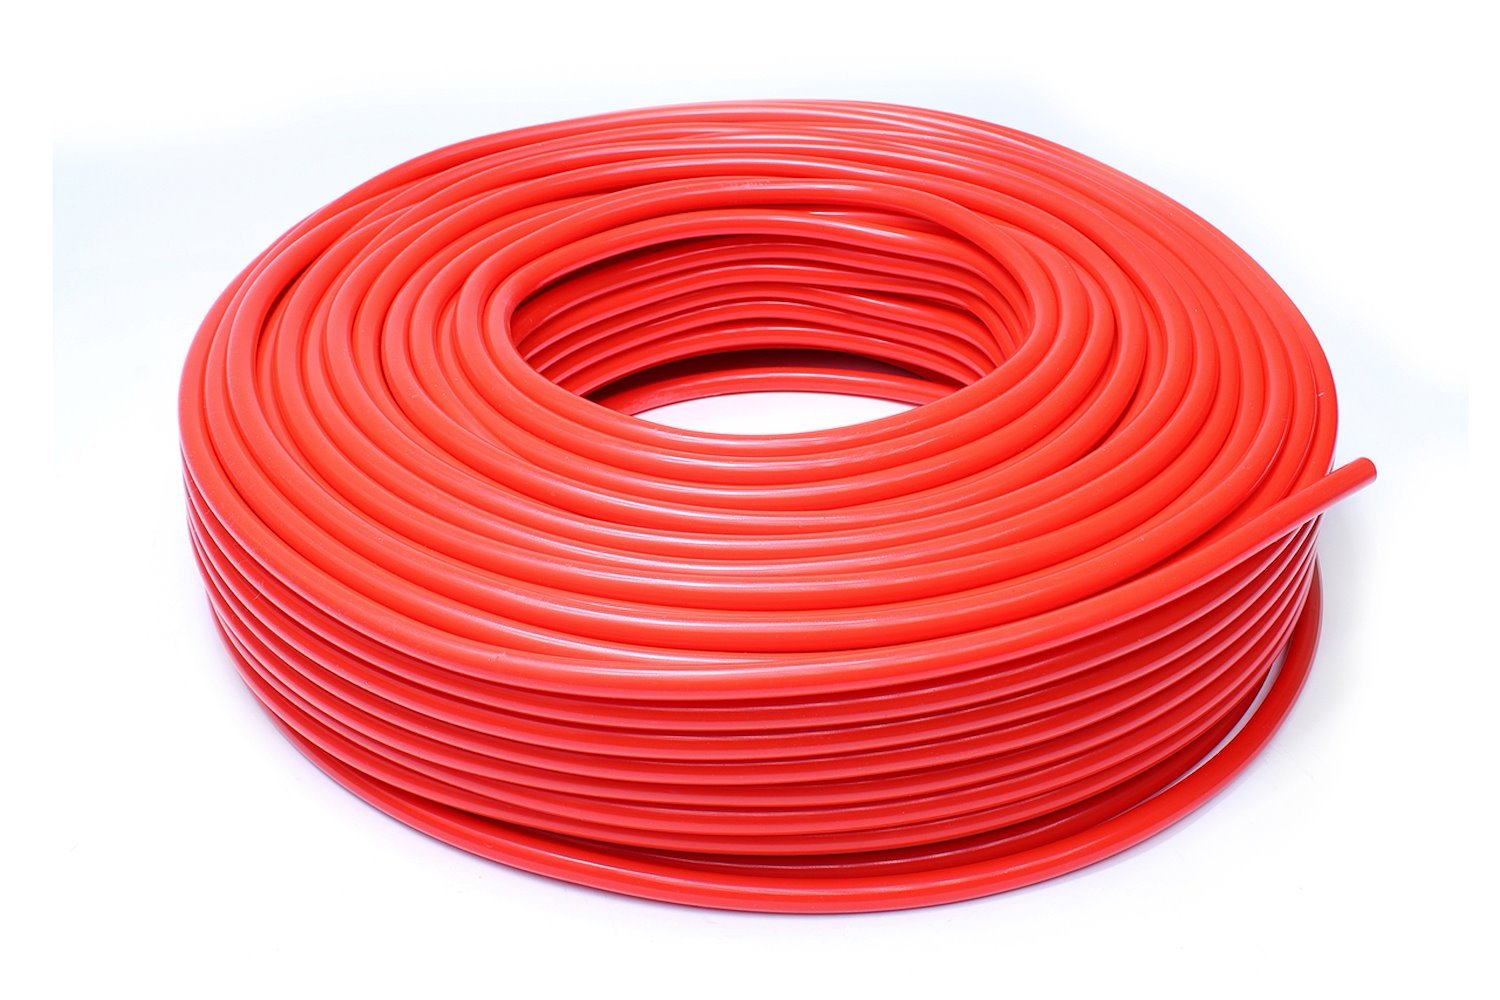 HTSVH4-REDx50 High-Temperature Silicone Vacuum Hose Tubing, 5/32 in. ID, 50 ft. Roll, Red